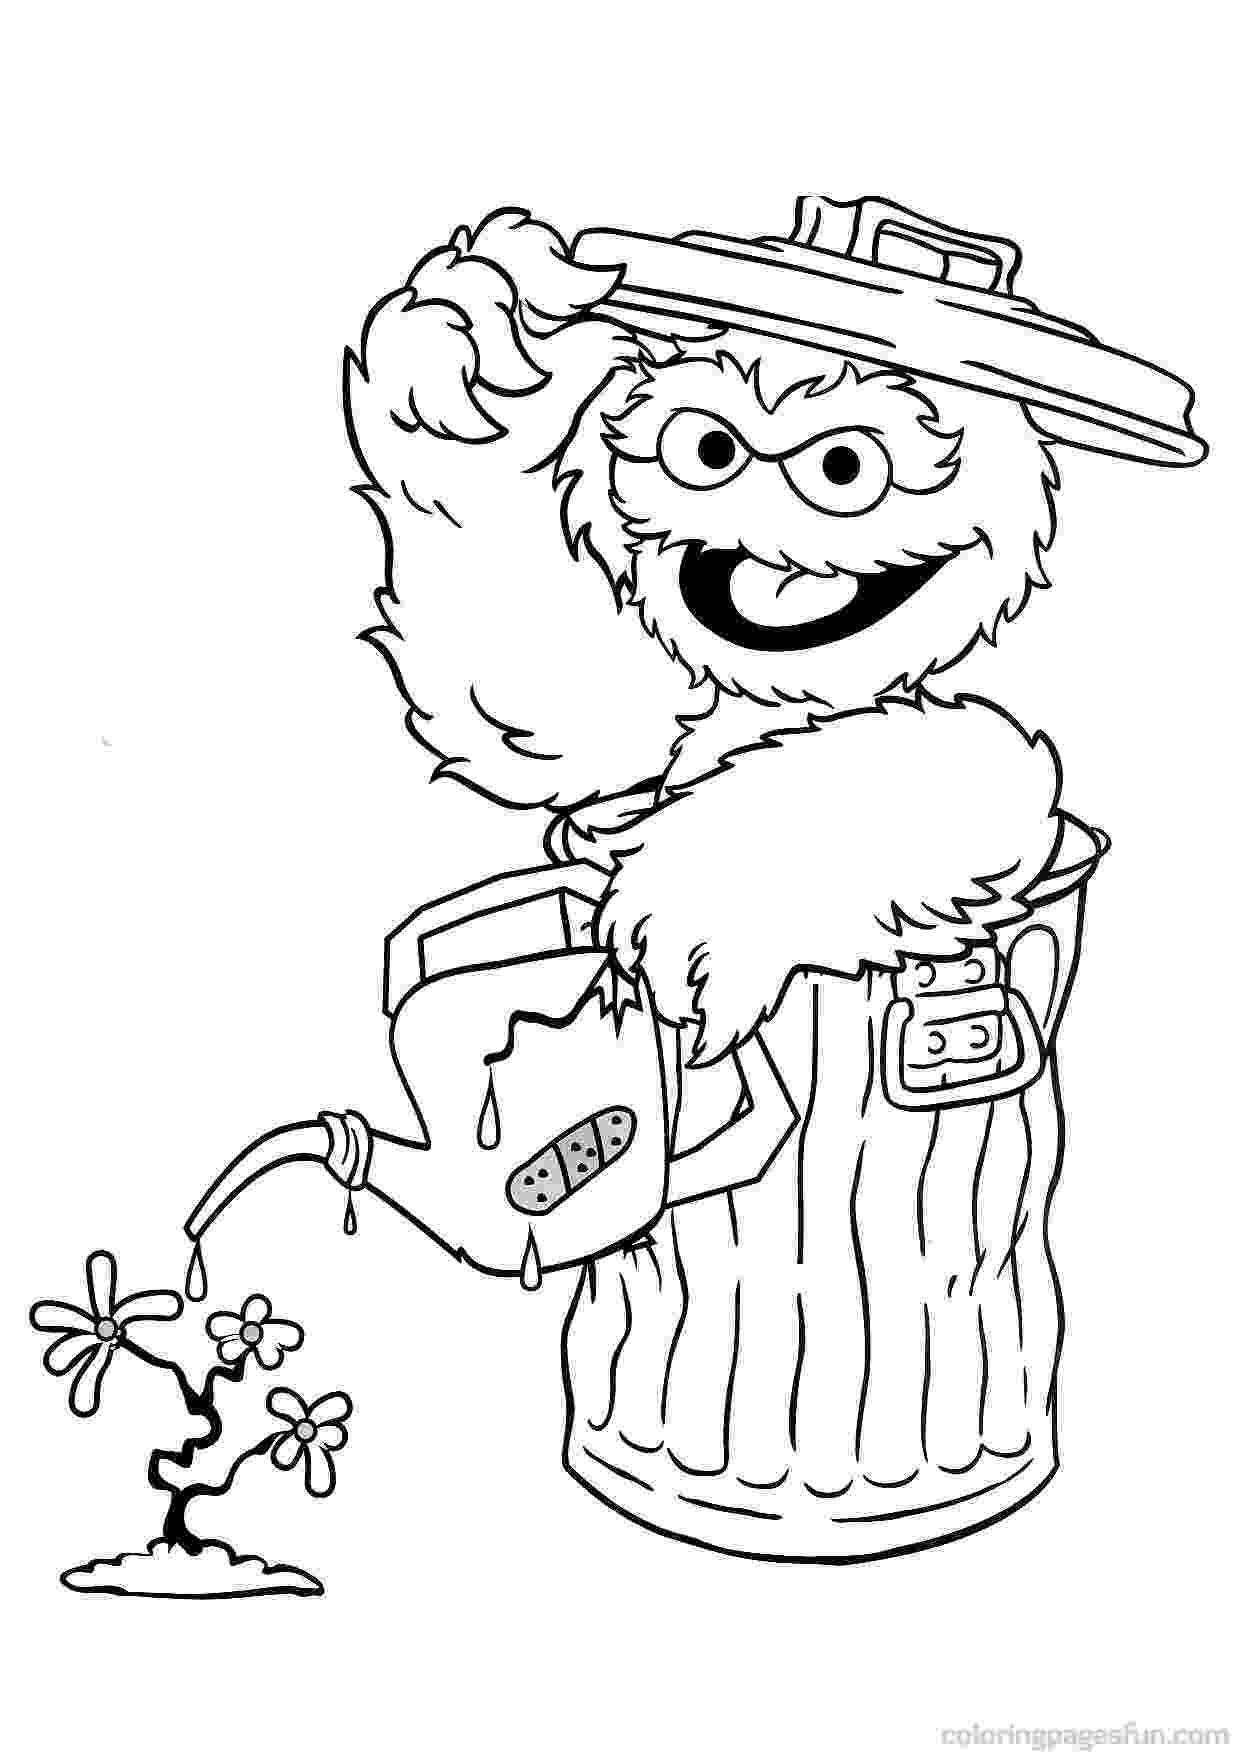 sesame street coloring pages free printable sesame street coloring page printable pages street sesame coloring 